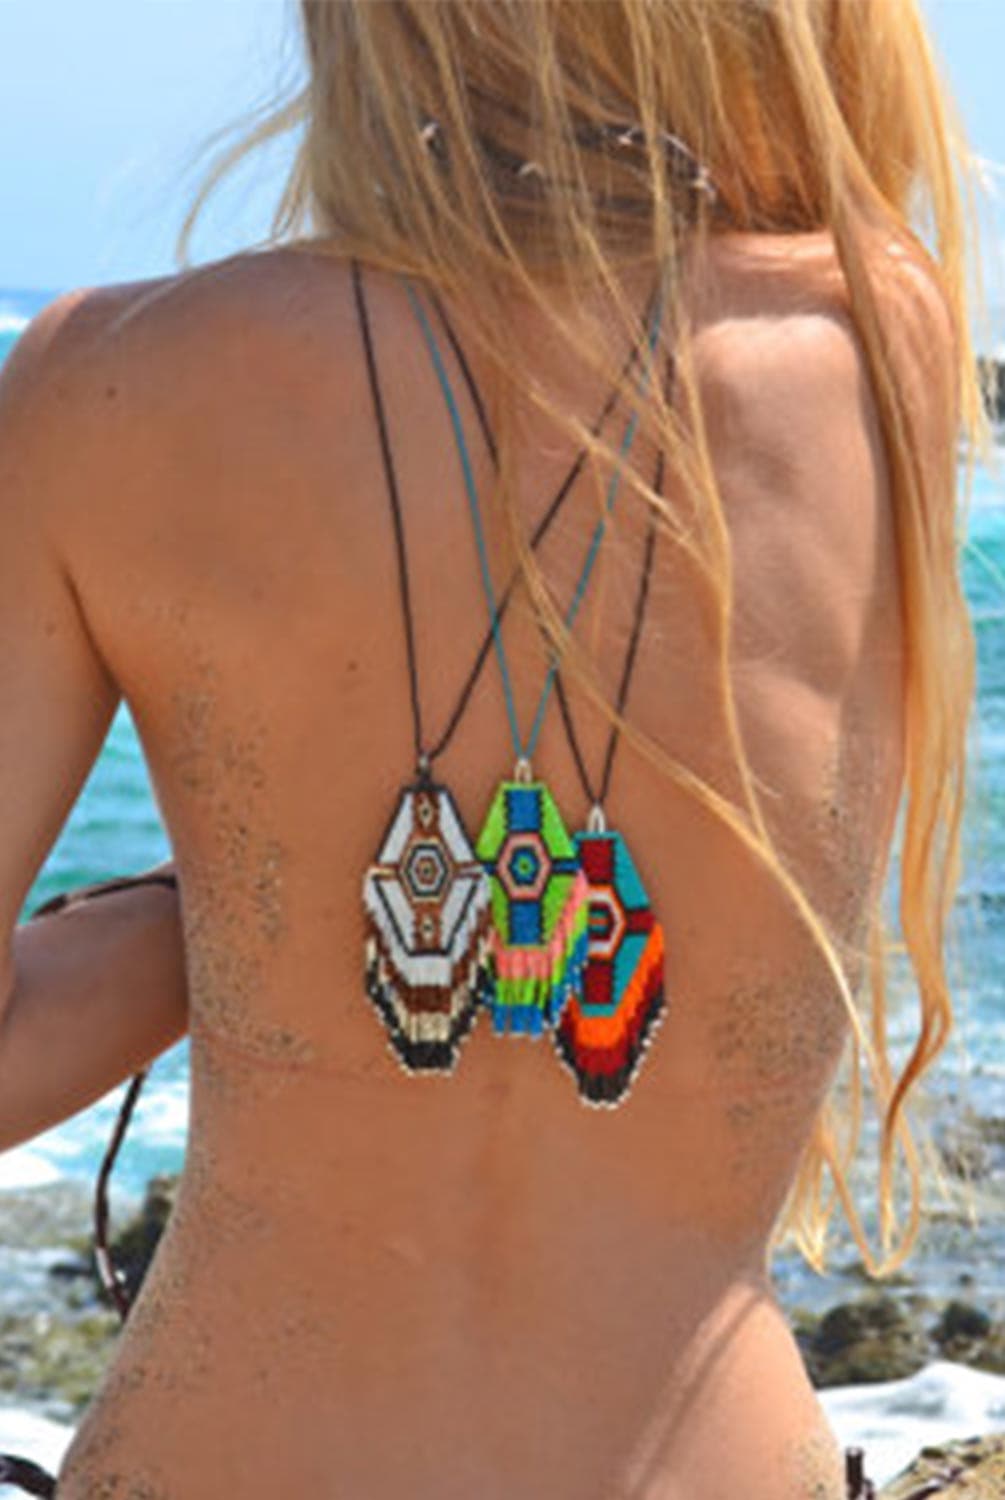 The Heart Majestic Jewelry Jelly Wax Fringe Necklace drapes perfectly over your beach, festival and yoga wear and adds an indie compliment to any look.